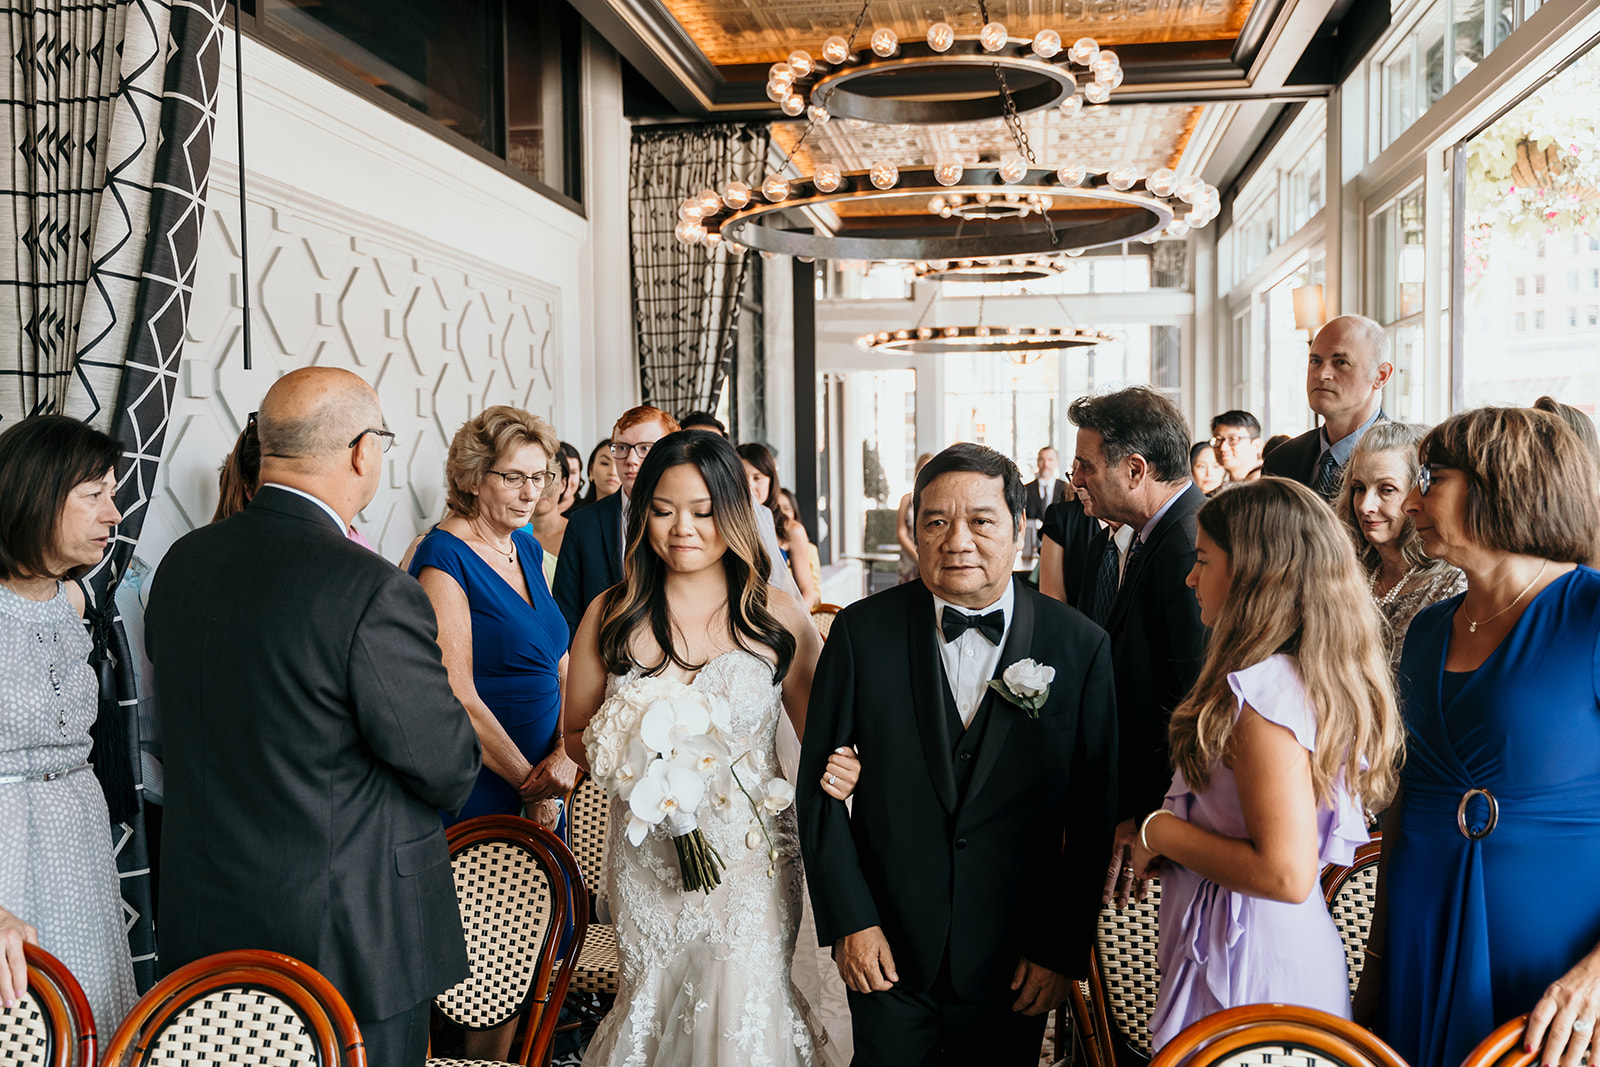 Timeless wedding at the Curtiss Hotel in Buffalo, NY